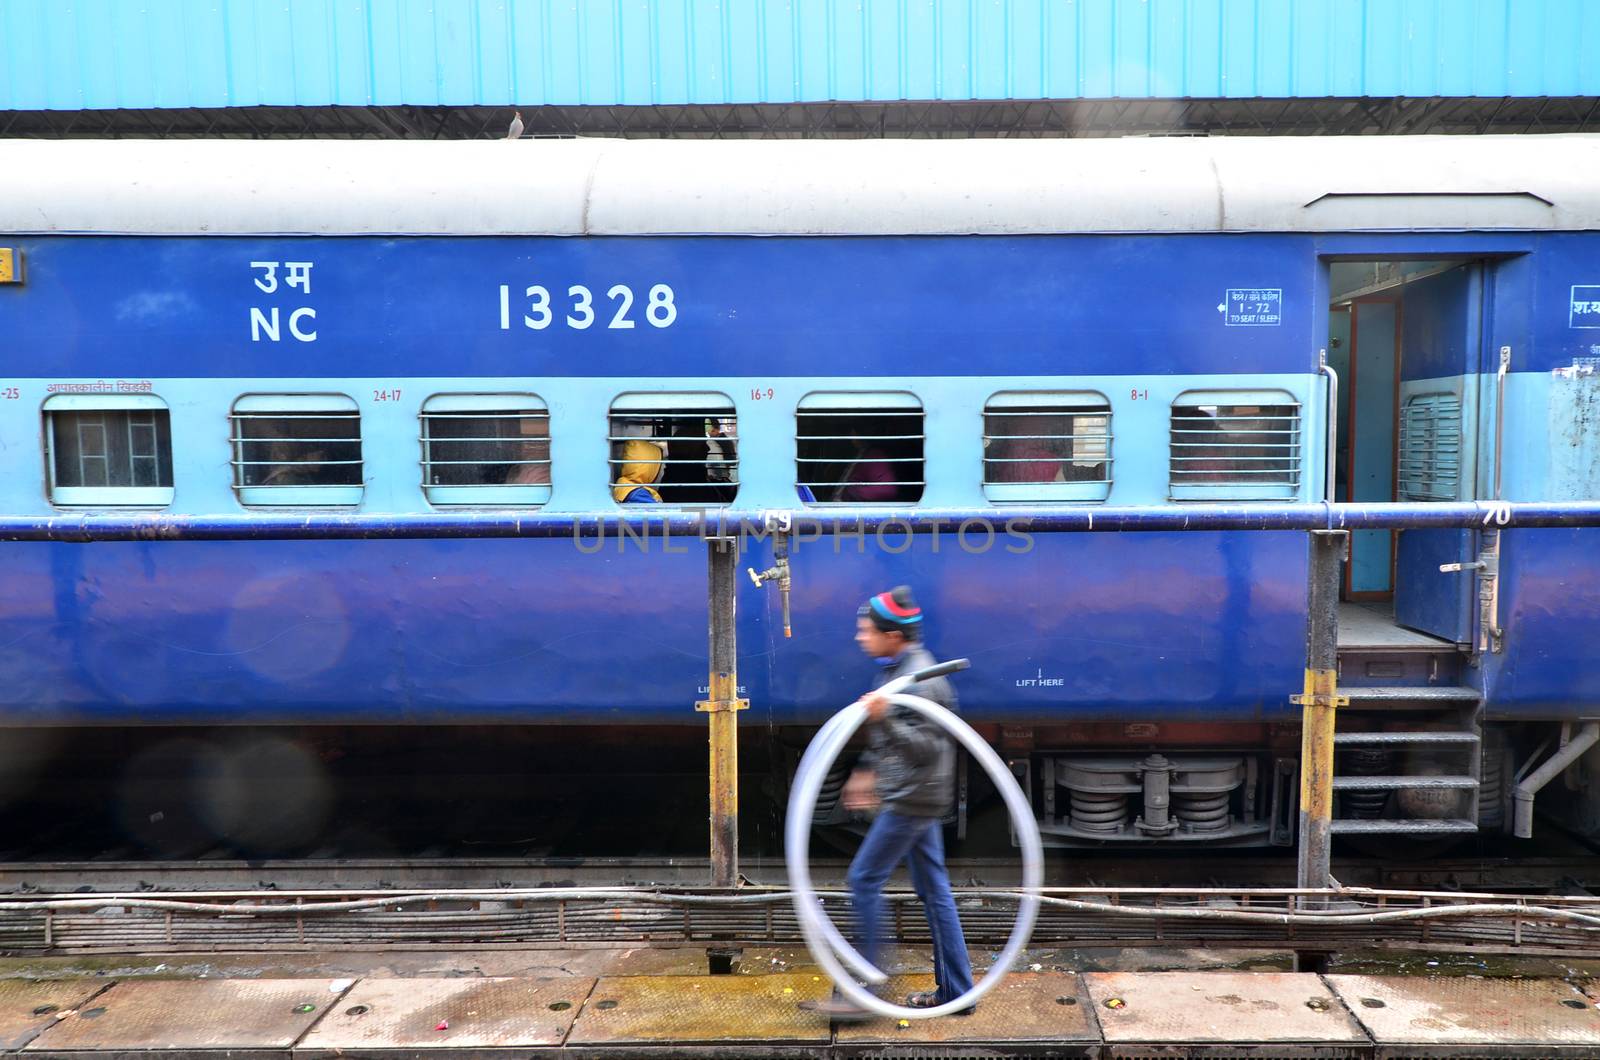 aipur, India - January 3, 2015: passengers at the window of a Indian Railway train at the railway station of Jaipur by siraanamwong